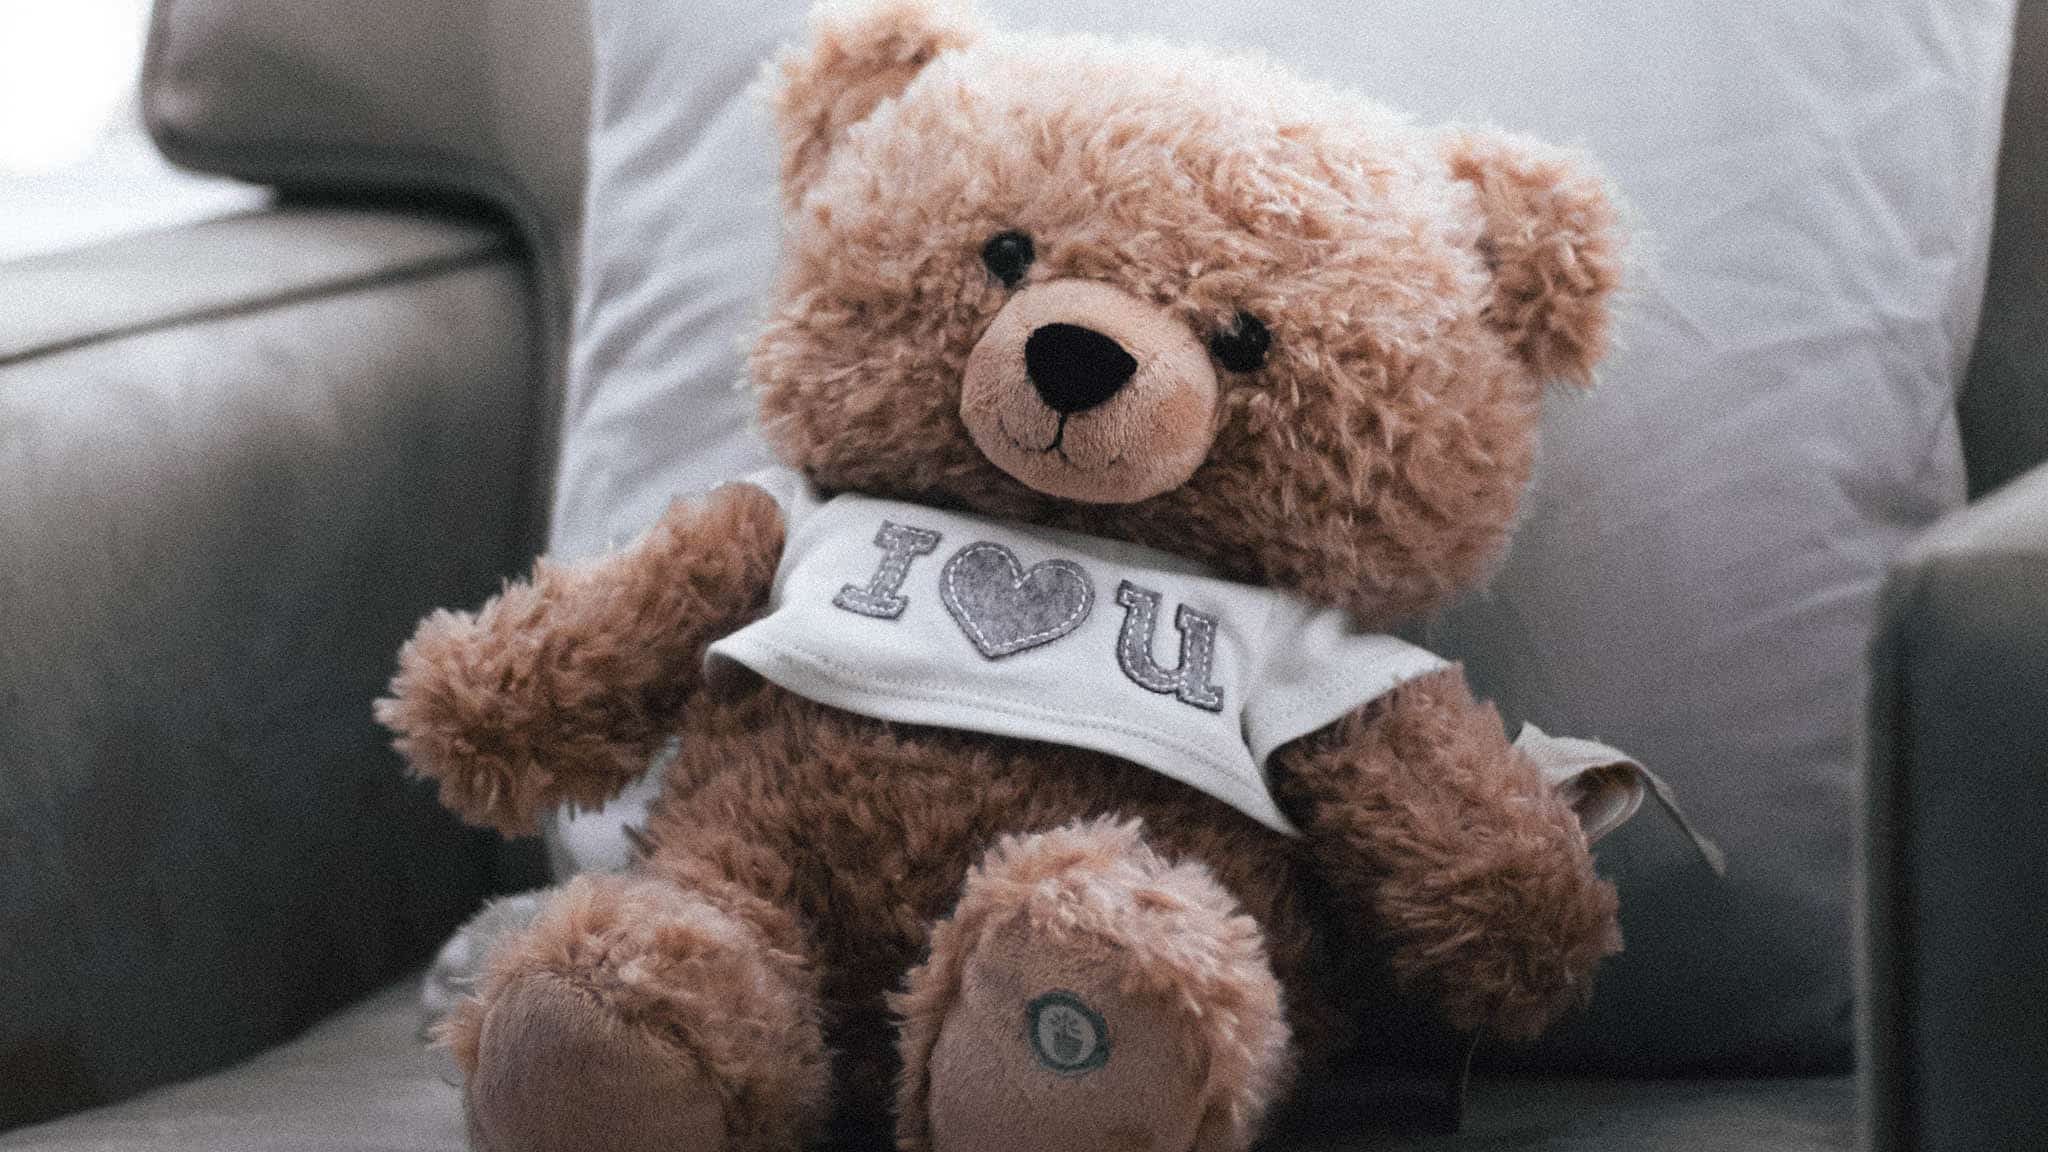 closeup photograph of teddy bear wearing "i heart u" t-shirt while sitting on a chair and contemplating feeling lonely after having a breakup